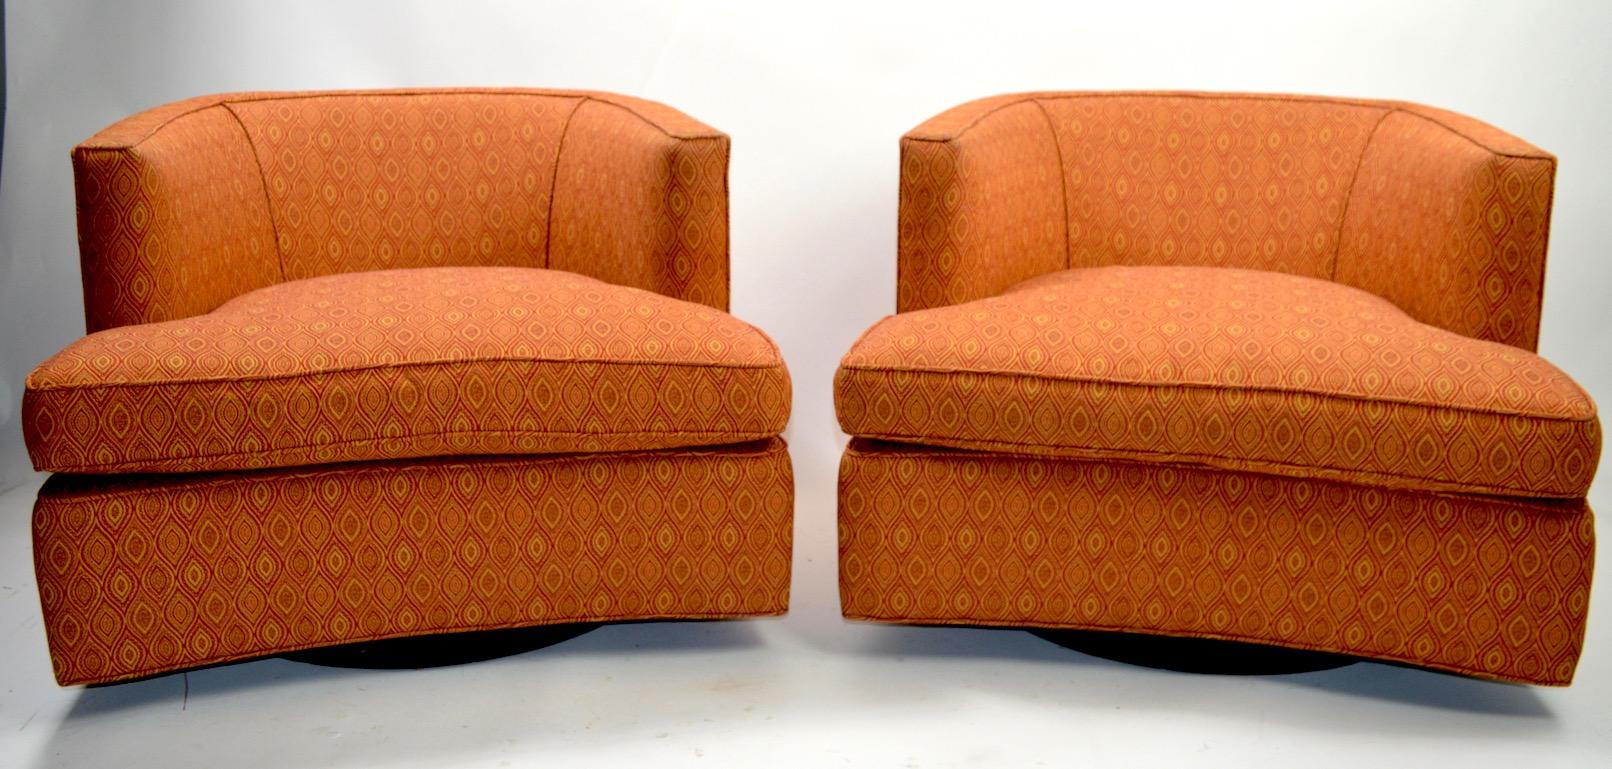 20th Century Pair of Swivel Lounge Chairs Designed by Harvey Probber